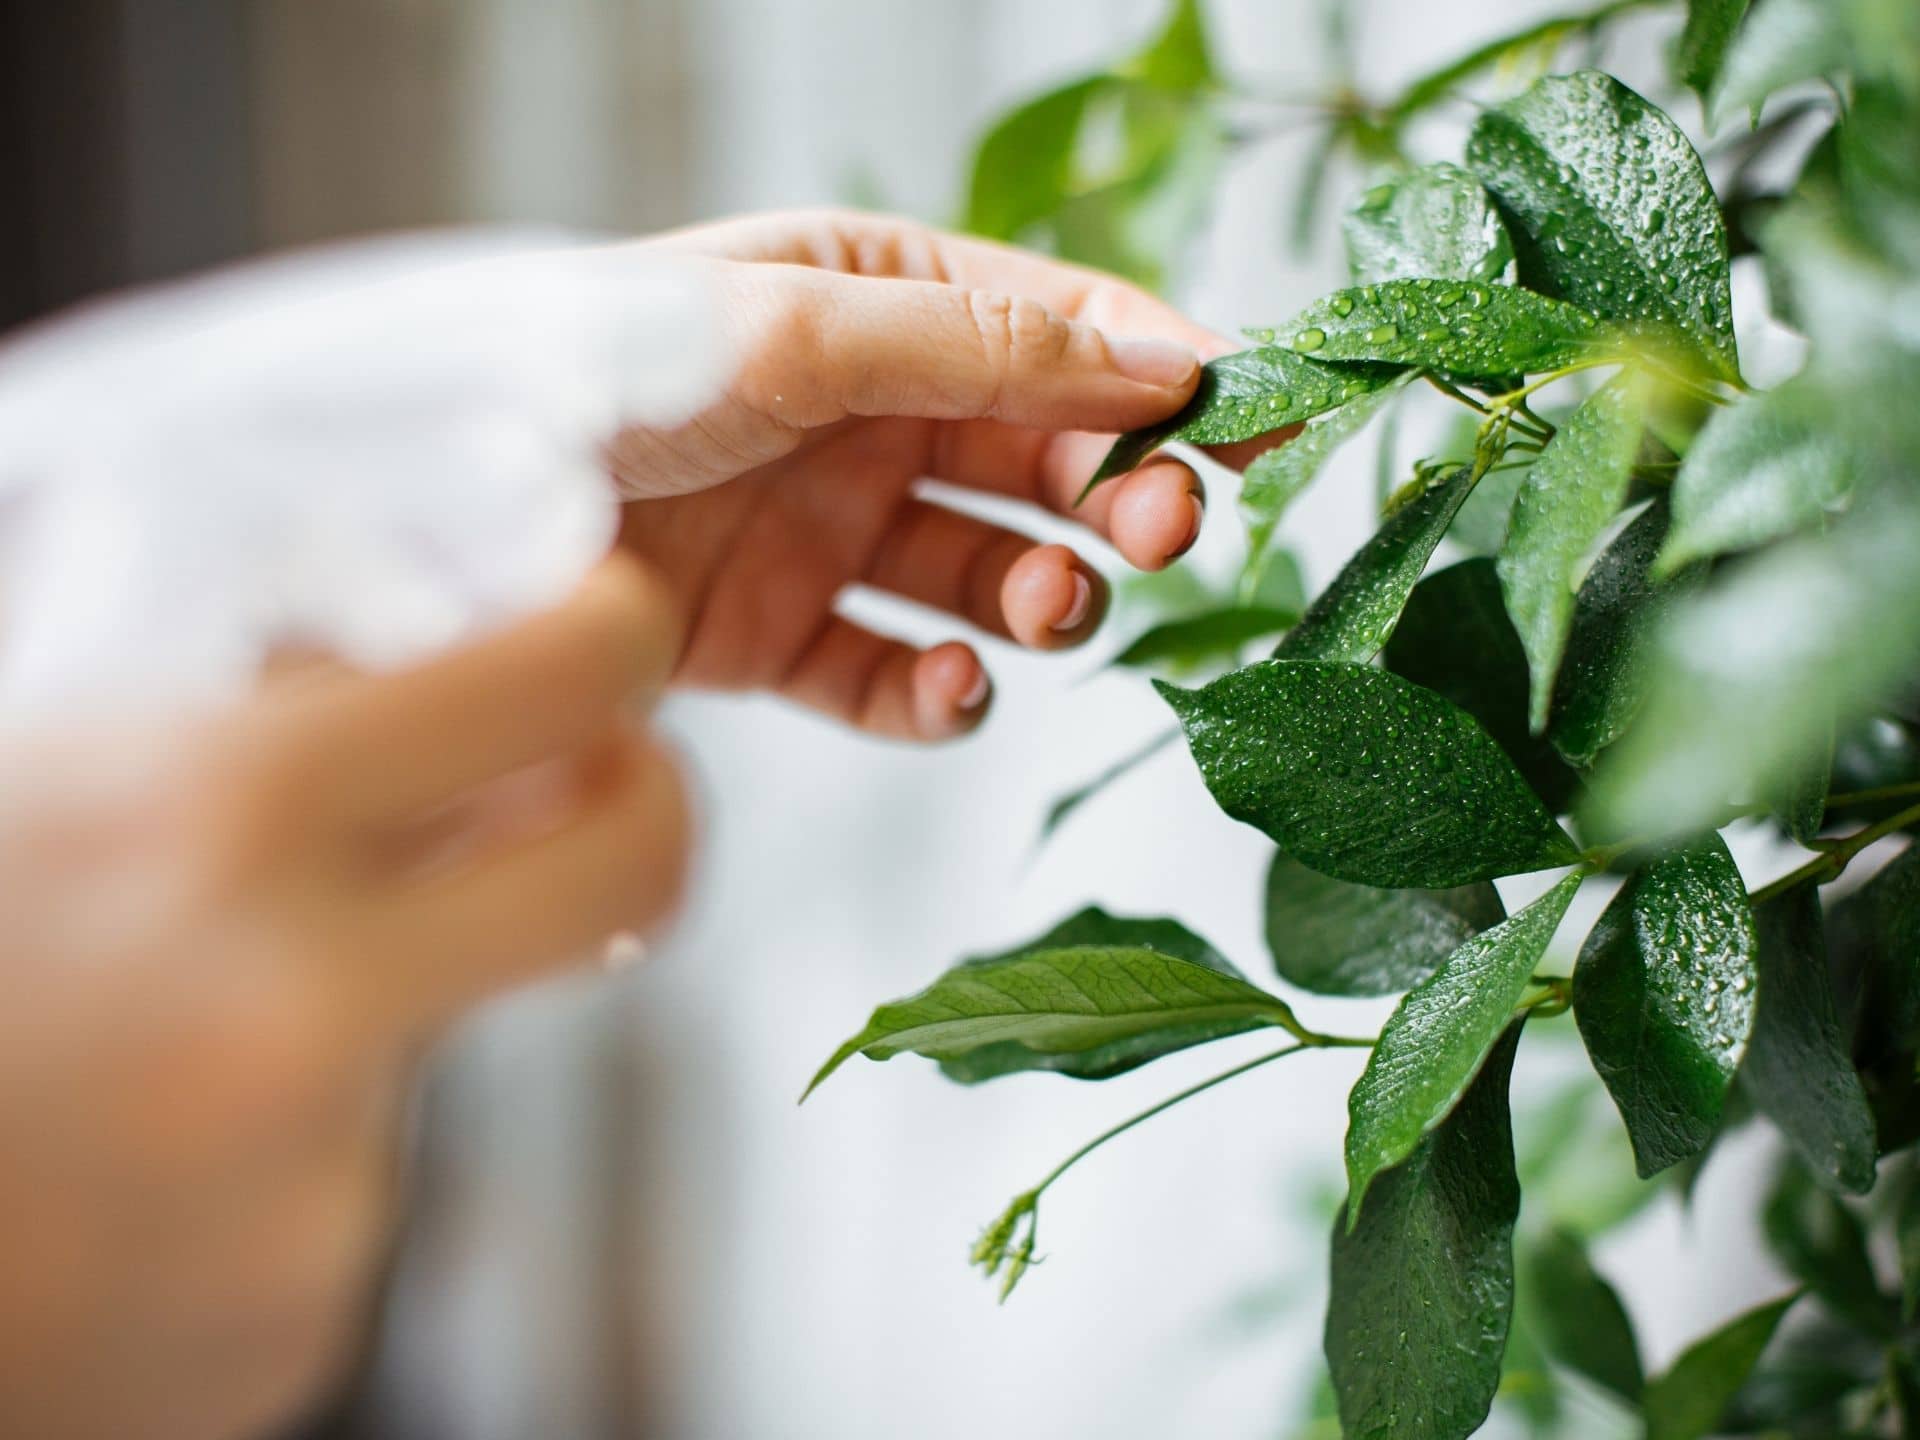 How to get rid of fungus gnats in houseplants- 10 Proven Tips